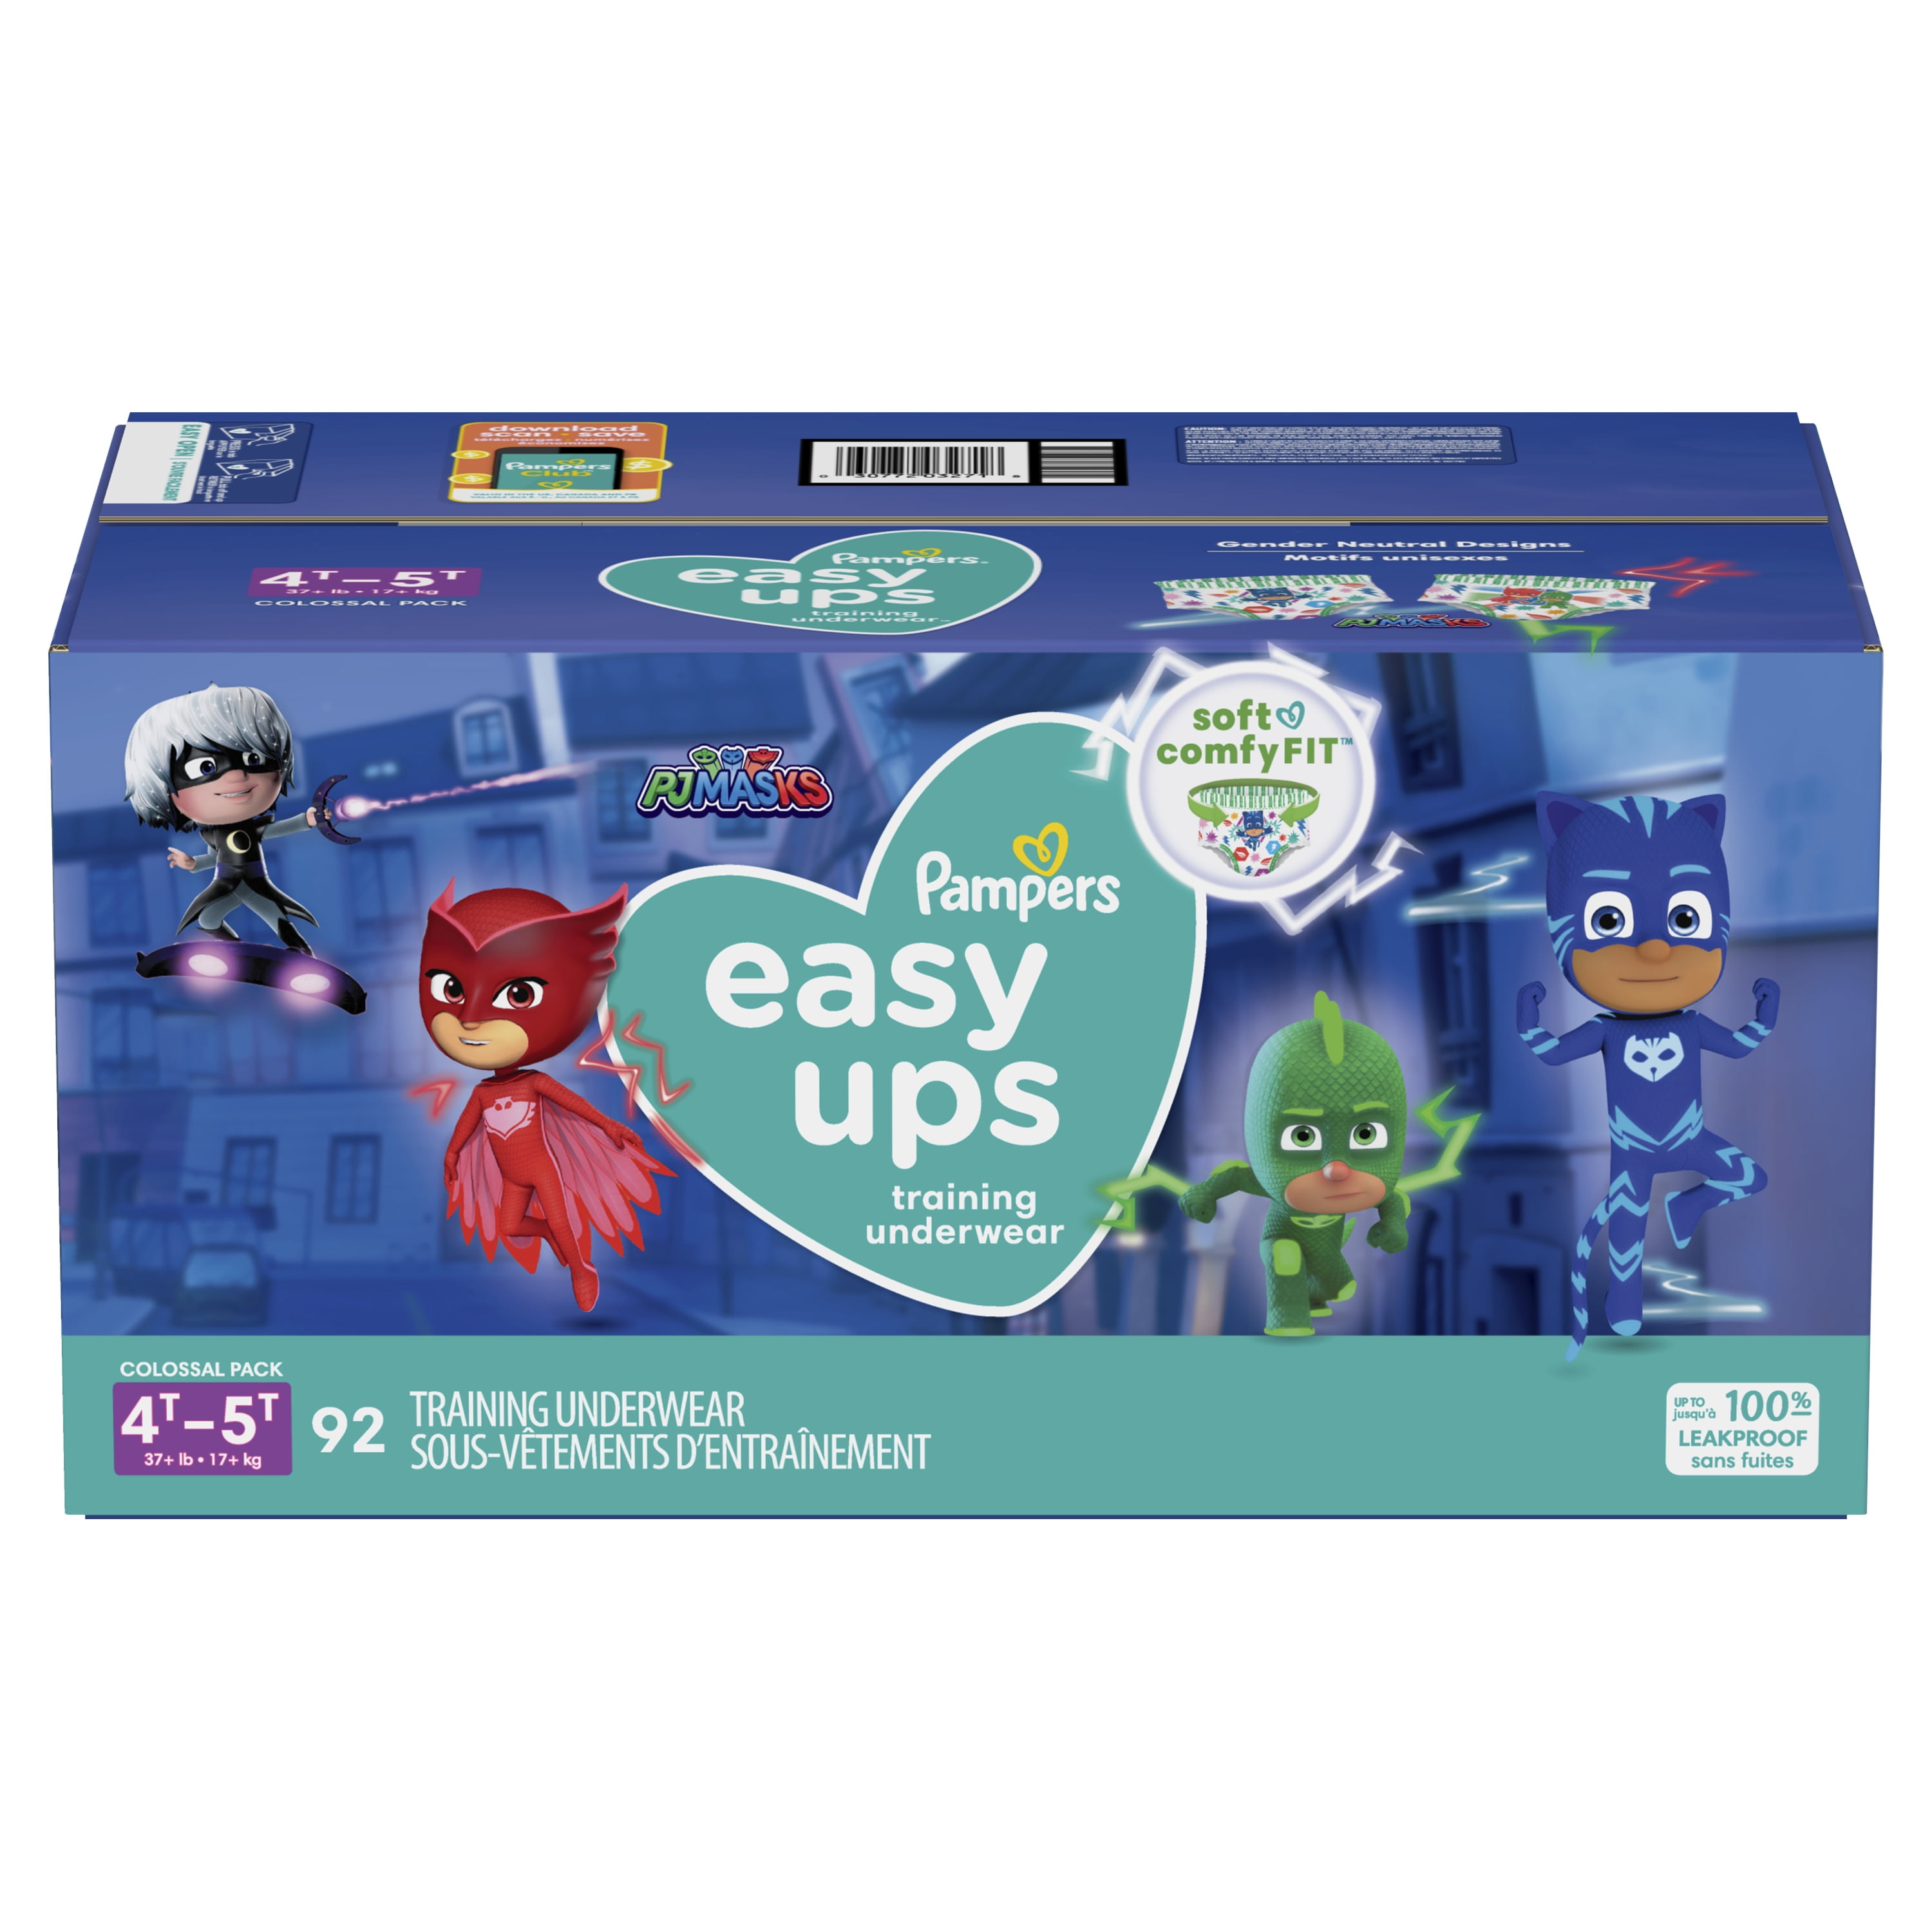 Pampers Easy Ups PJ Masks Boys Training Pants Size 4T-5T, 92 Count (Choose Your Size & Count)